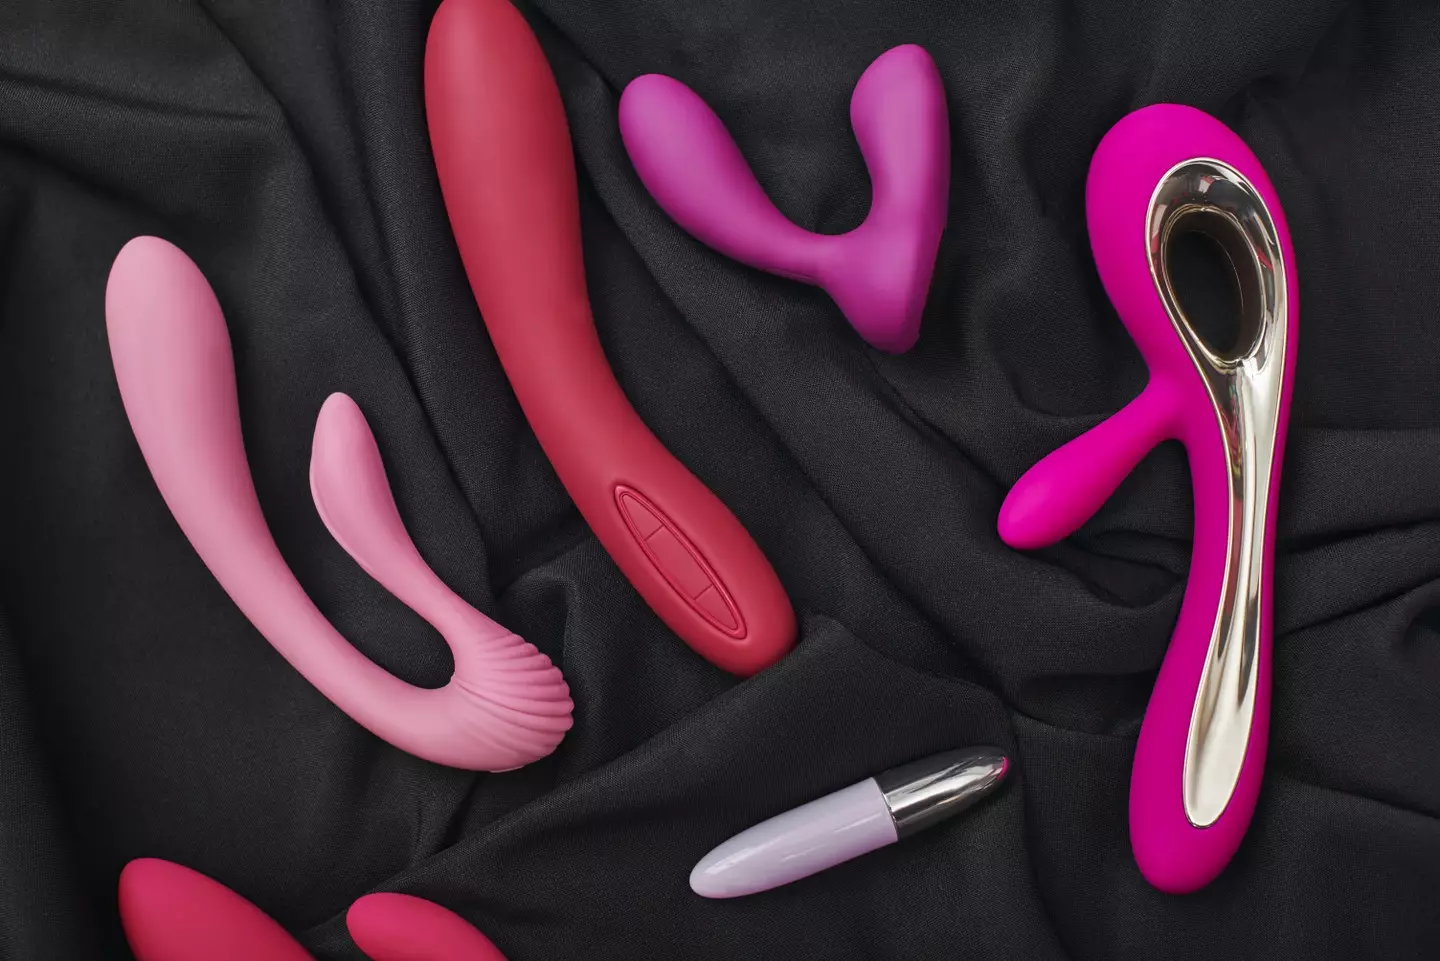 Singletons will use Bluetooth-synced sex toys to test sexual chemistry.